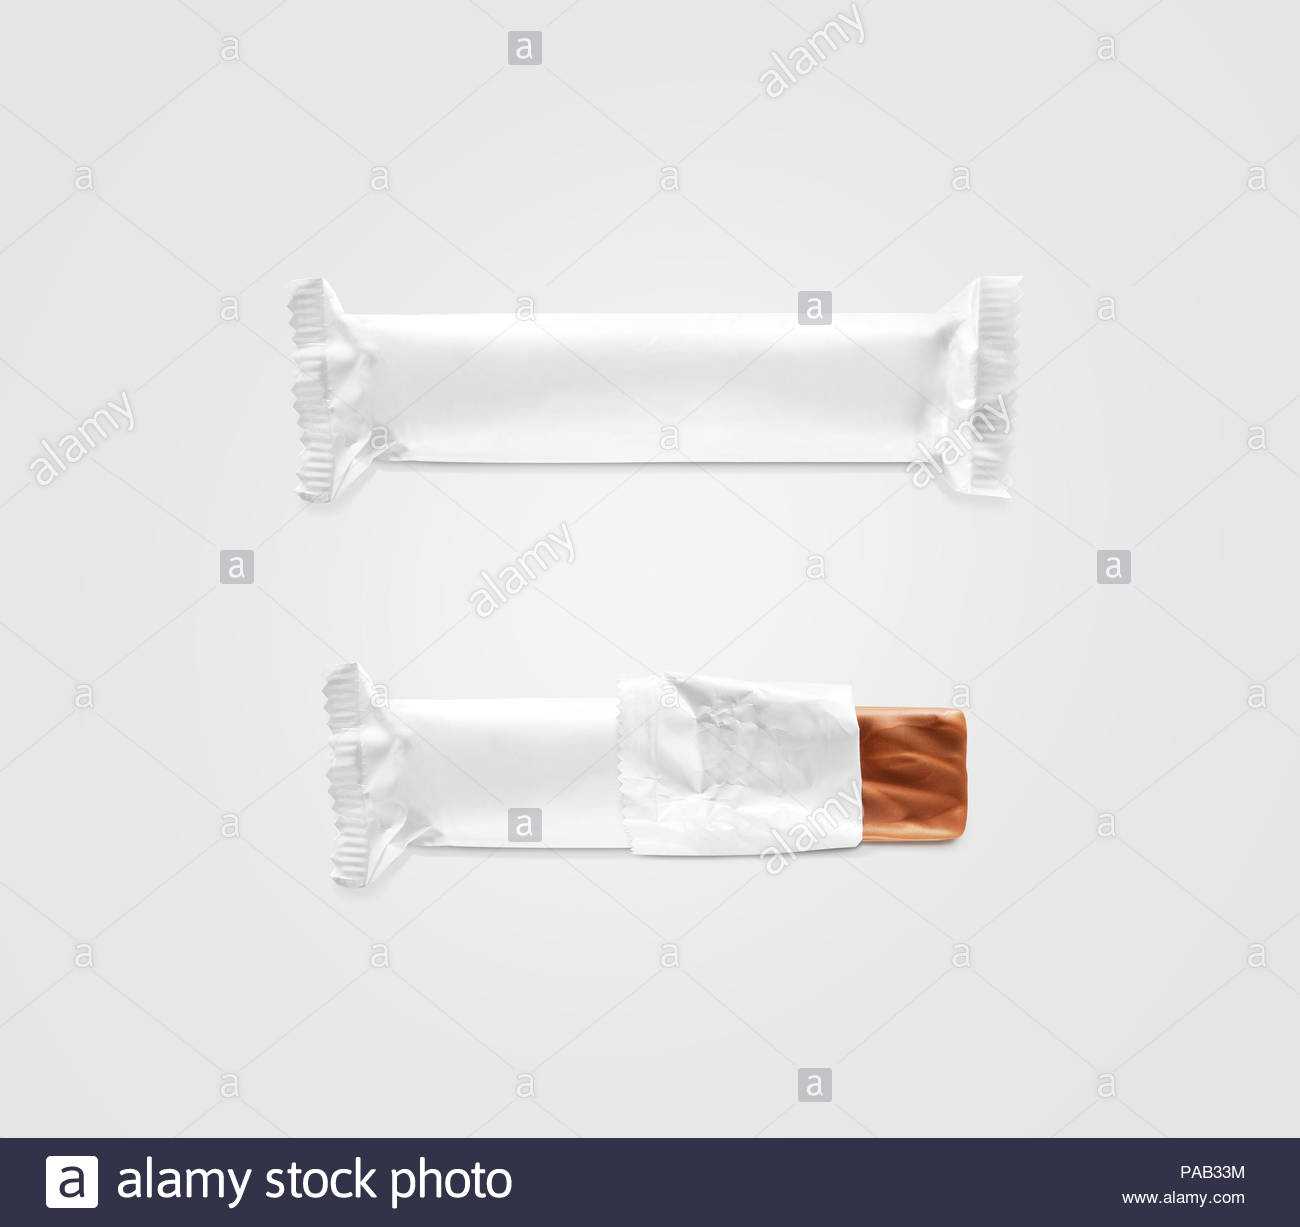 Blank White Candy Bar Plastic Wrap Mockup Isolated. Closed With Blank Candy Bar Wrapper Template